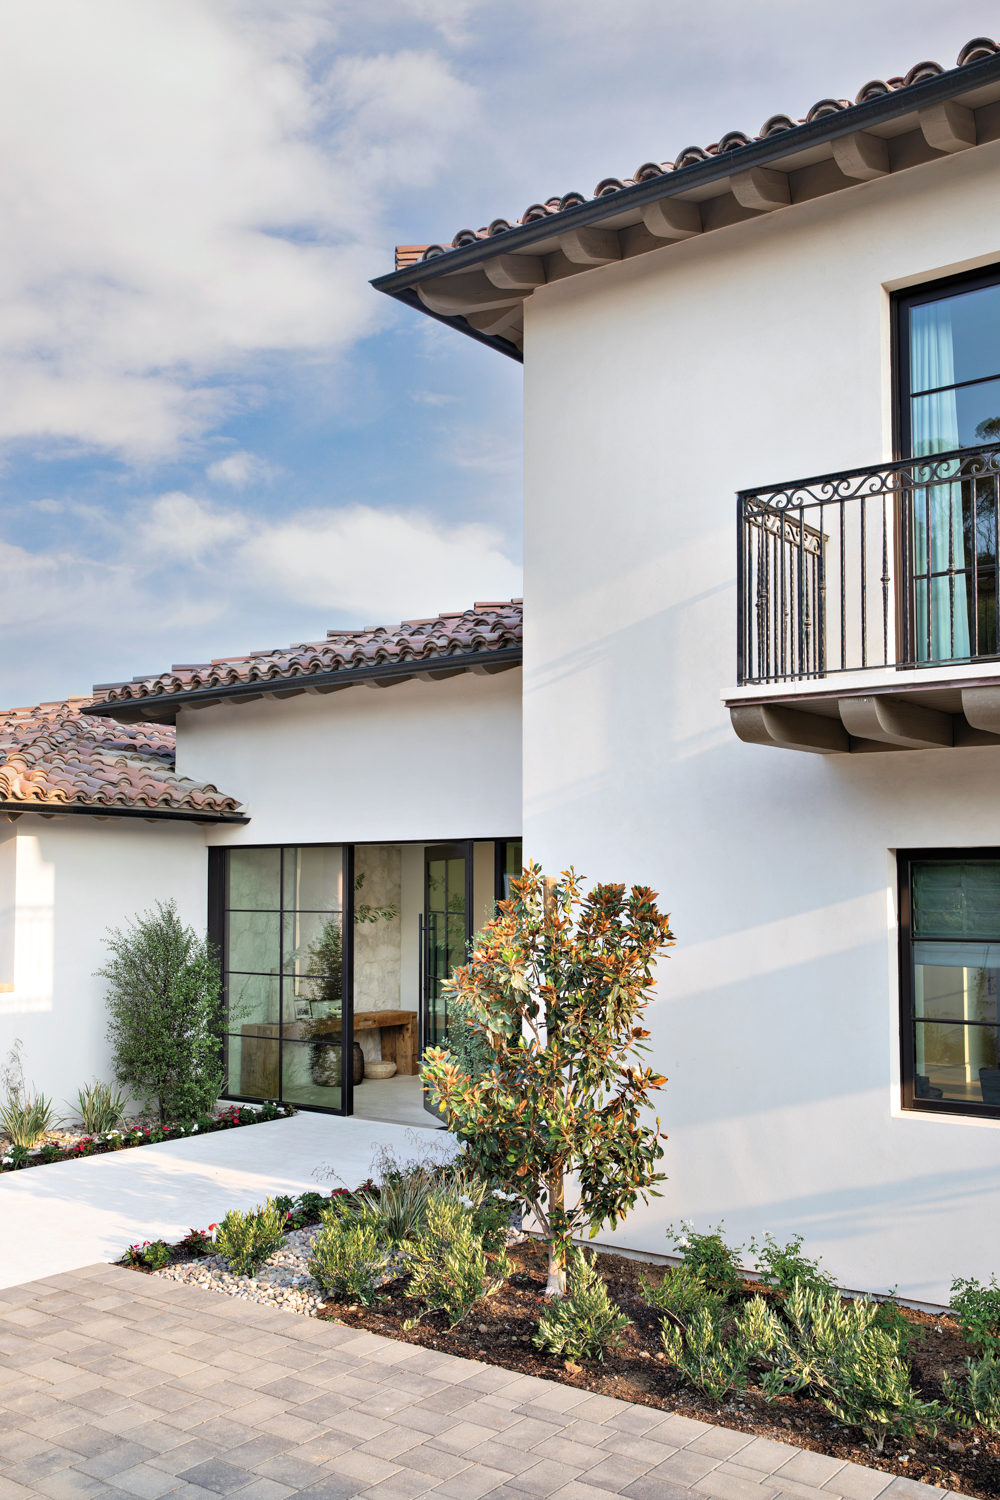 San Diego home with tiled roof and simple ironwork that nods to a Mediterranean influence